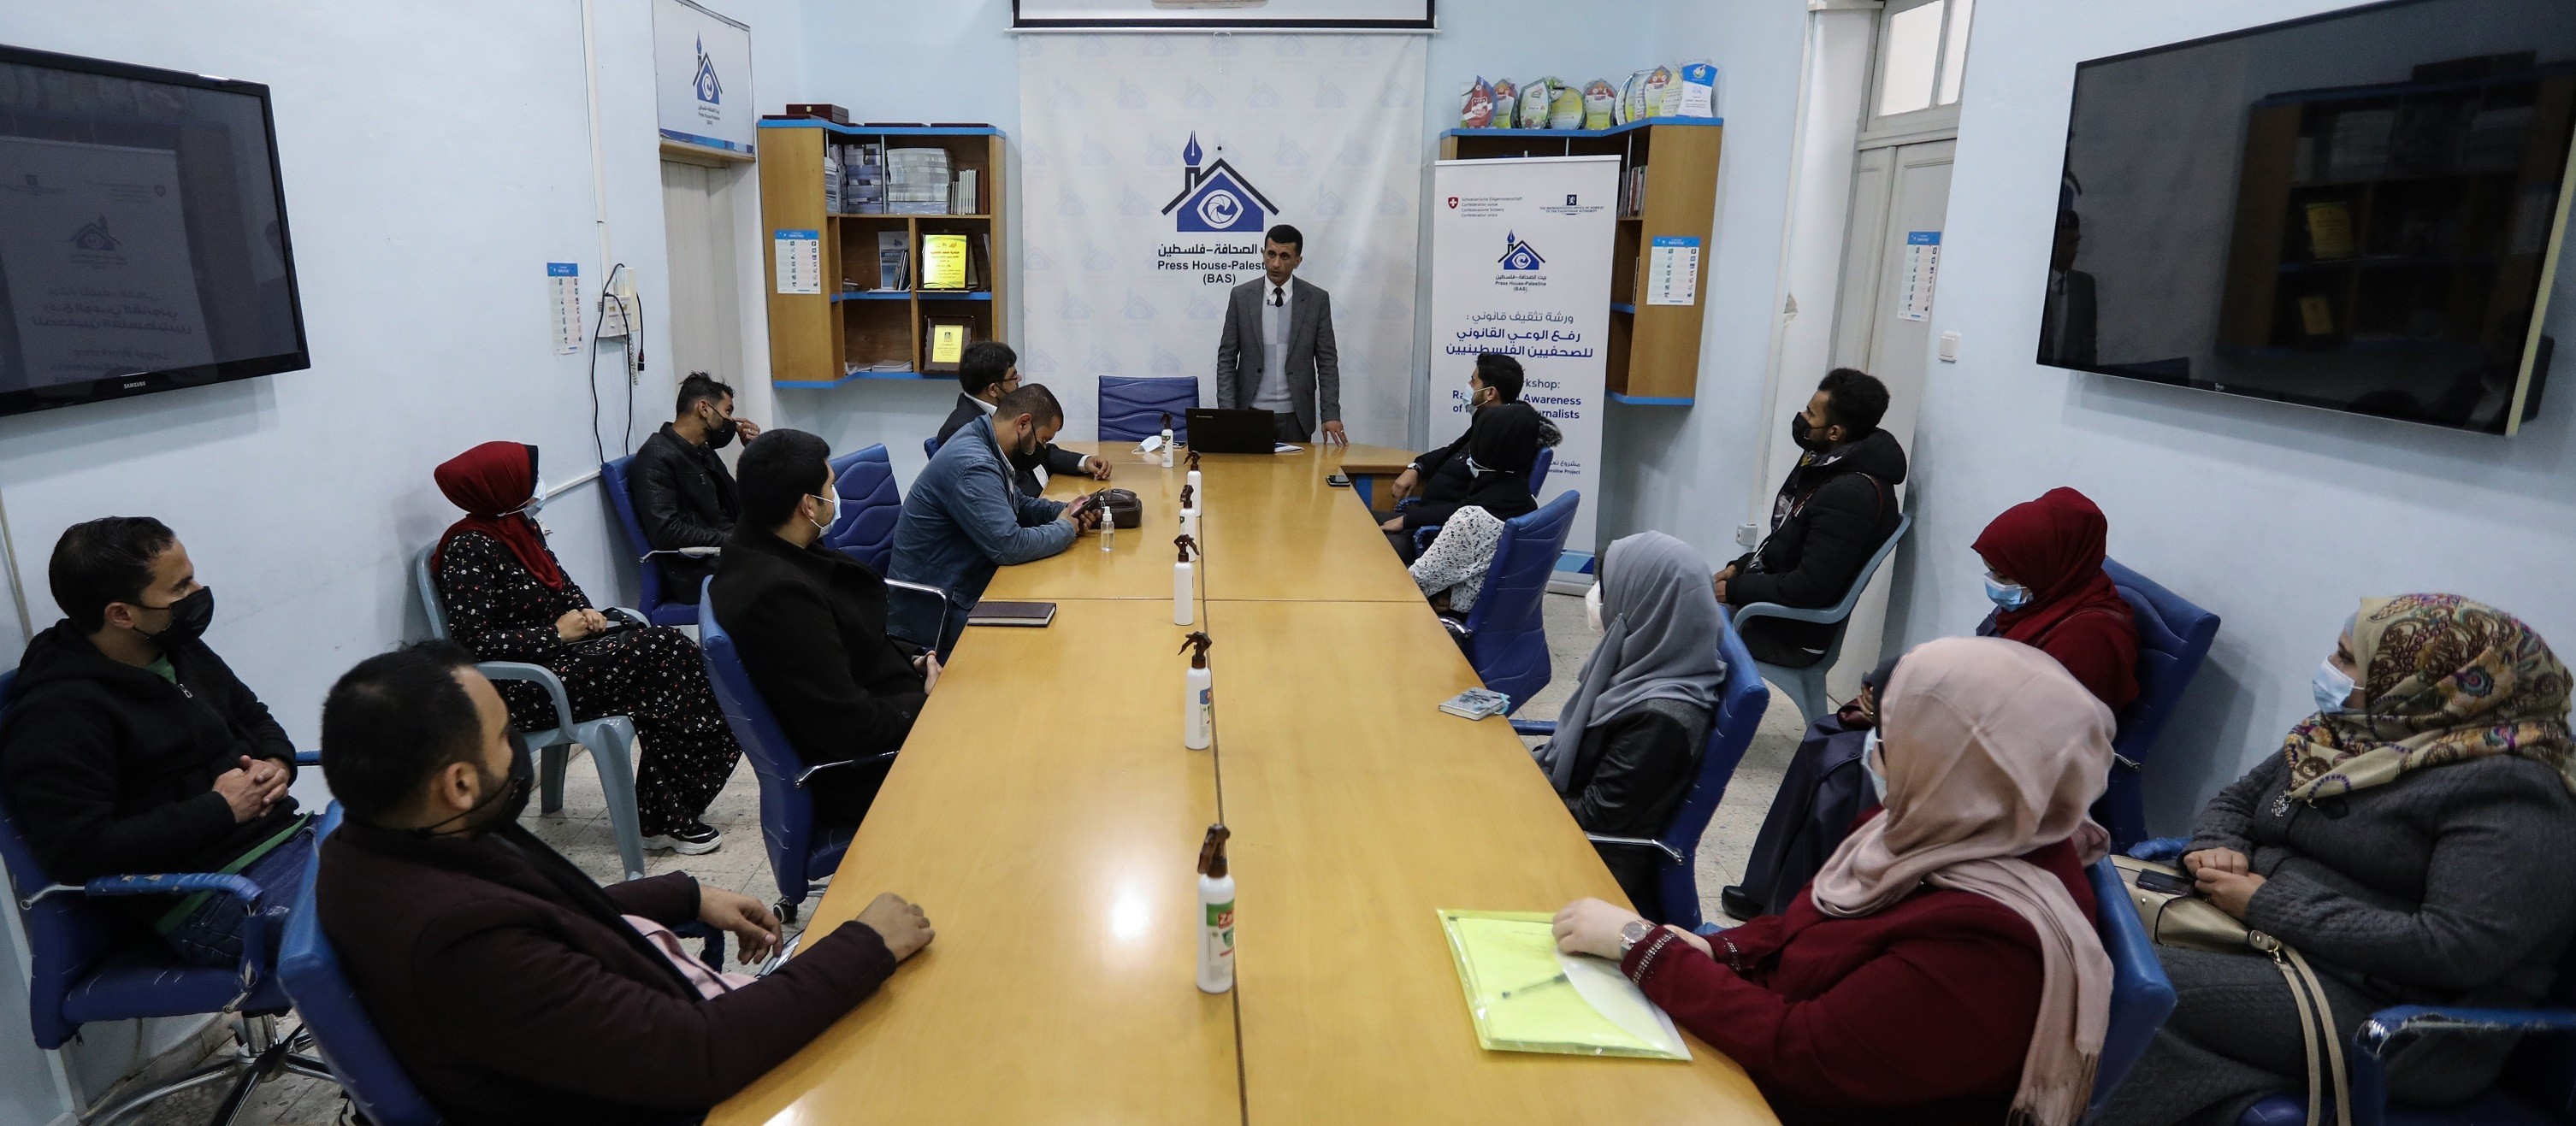 Press House organizes two awareness workshops on the topic of “Rumors and Mechanisms of verifying news and Information Sources”